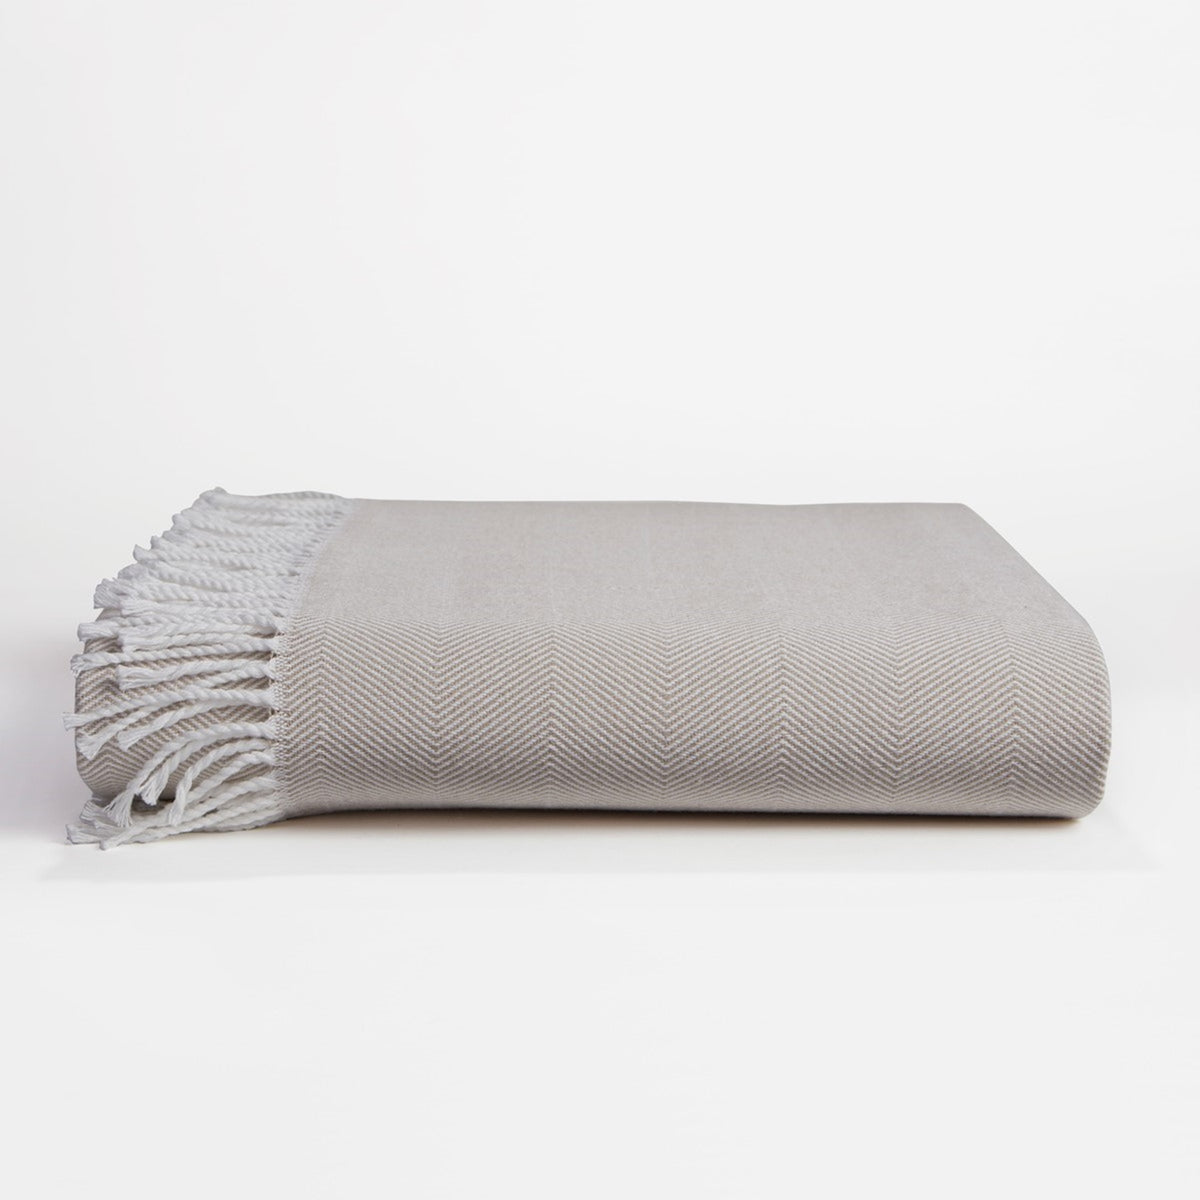 Clear Image of Downtown Company Herringbone Throw Charcoal in Taupe White Color